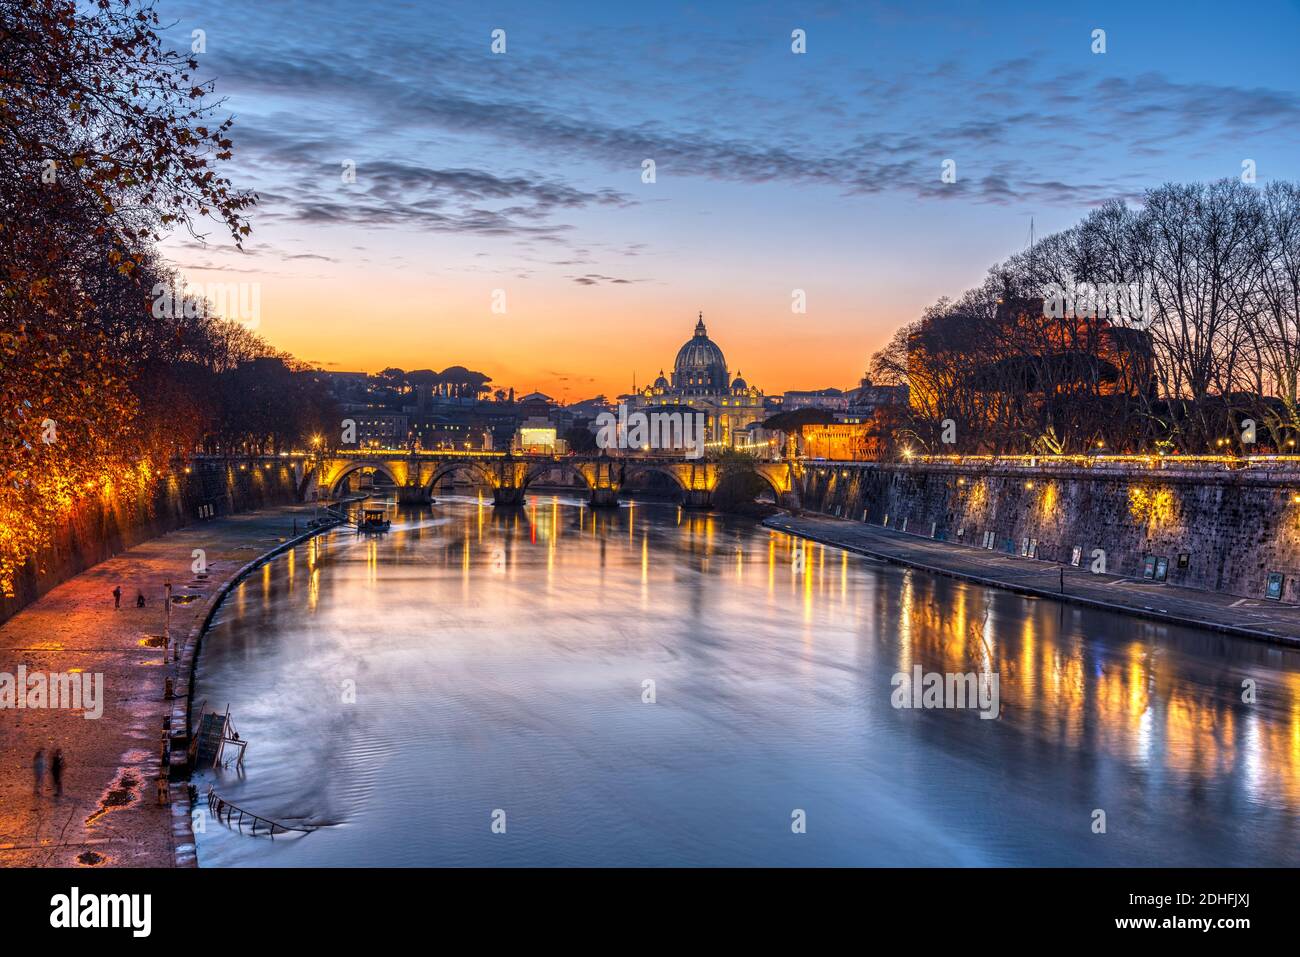 Dramatic sunset over the St. Peters Basilica and the river Tiber in Rome Stock Photo